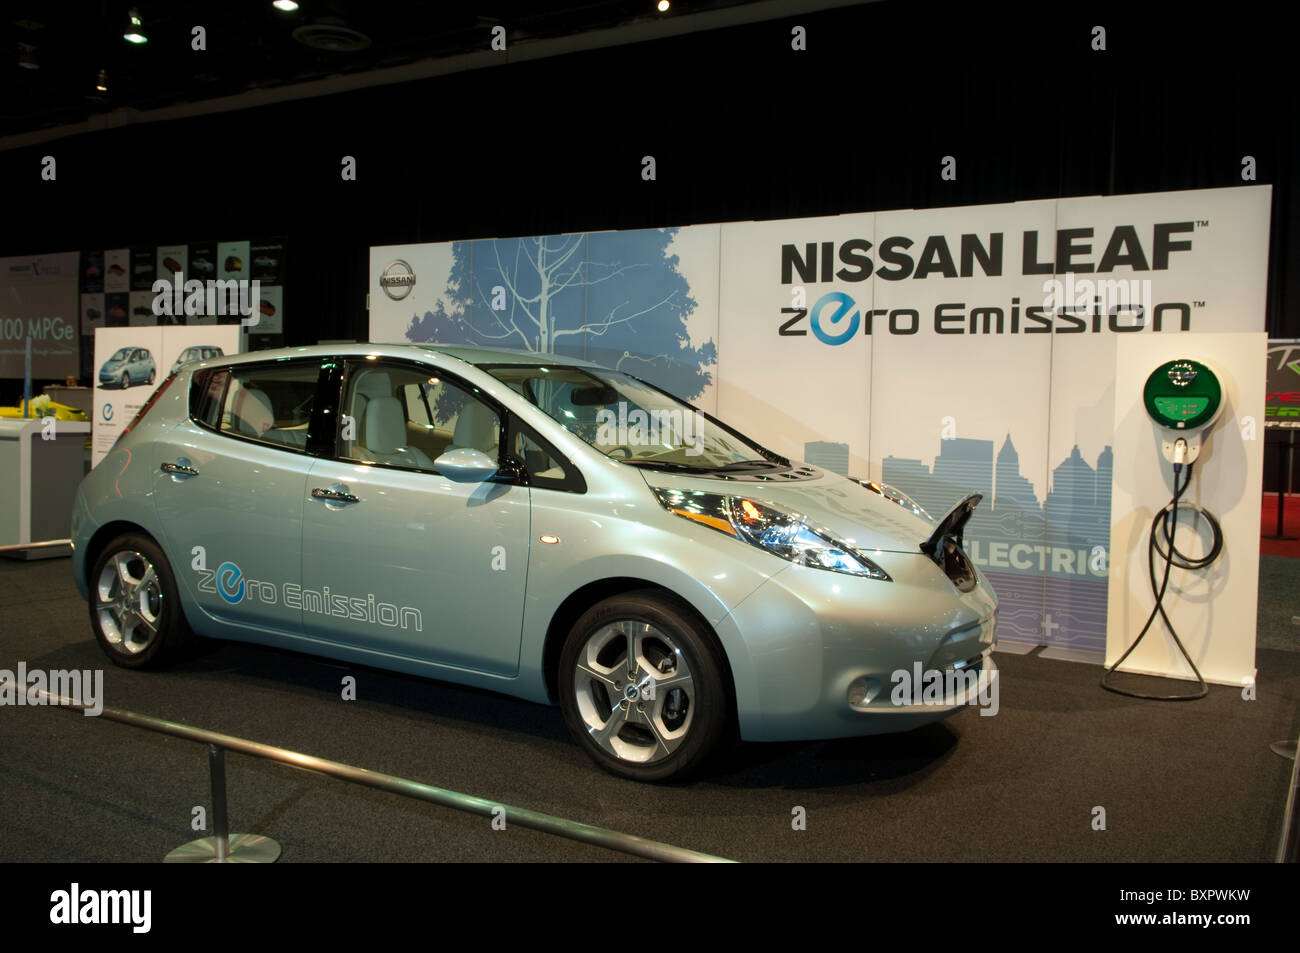 Nissan Leaf electric car at the 2010 North American International Auto Show in Detroit. Stock Photo